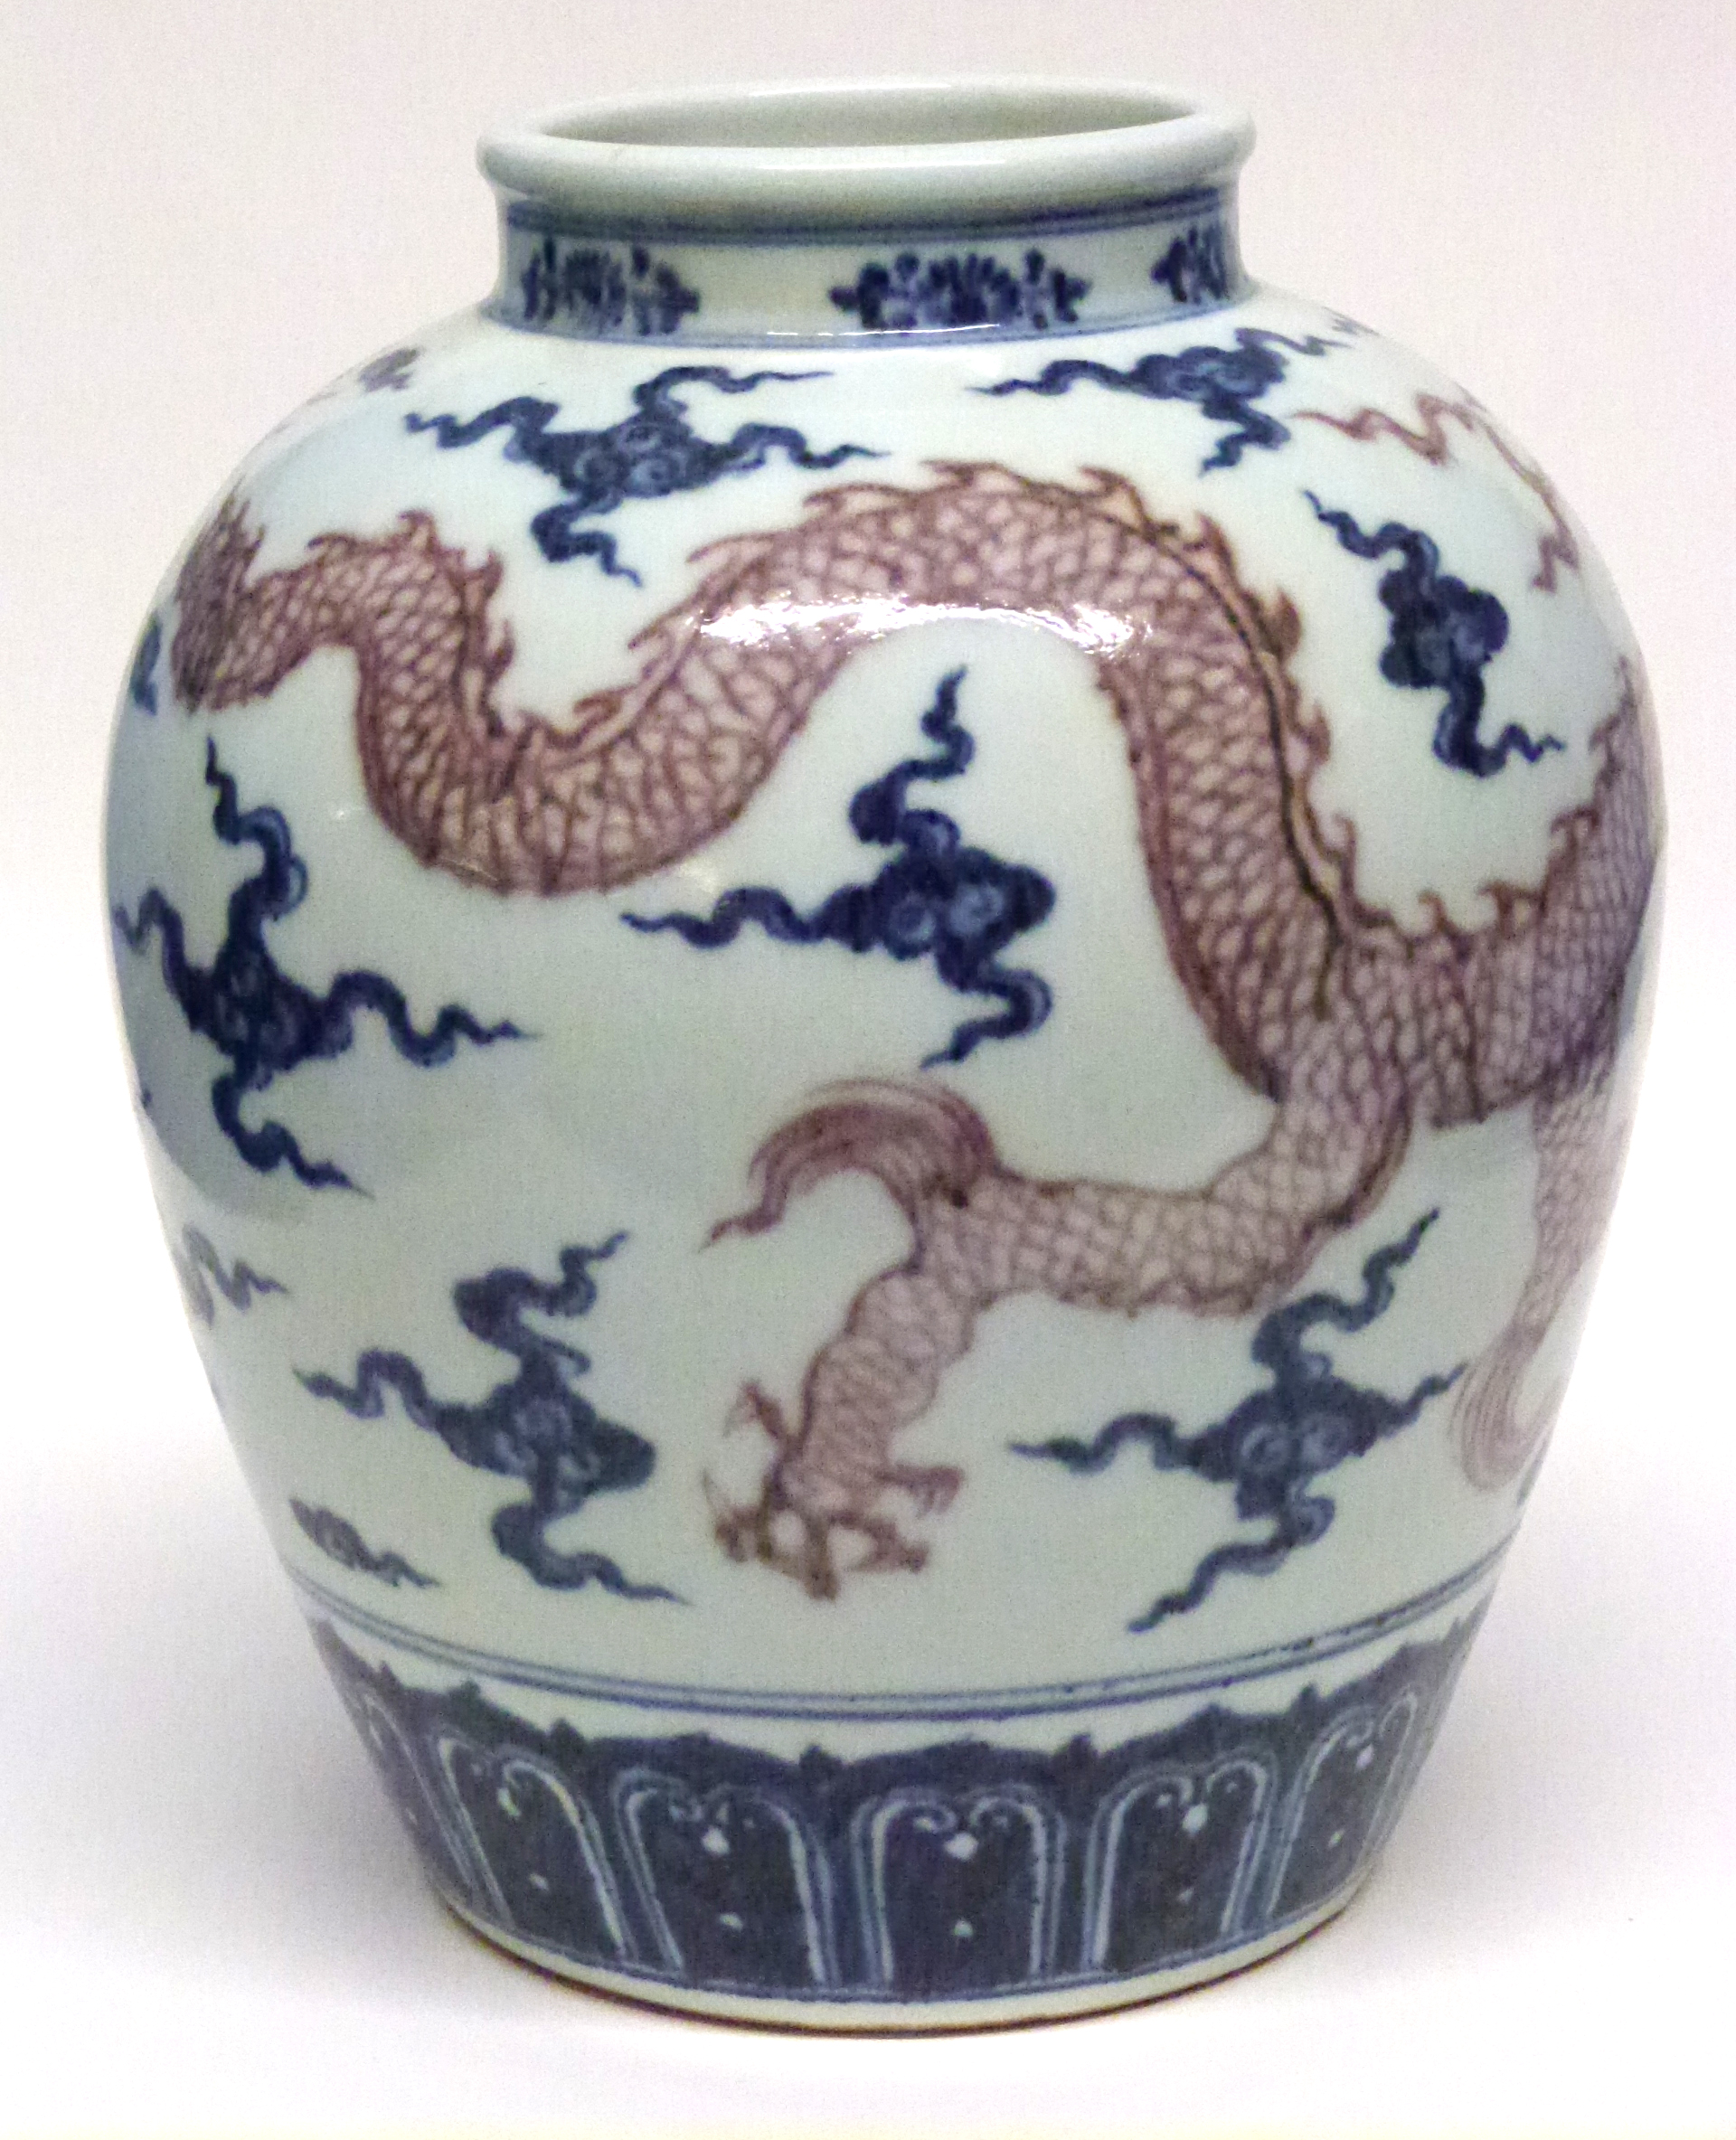 Chinese porcelain globular vase decorated in Ming style, with a Chinese dragon in iron red chasing